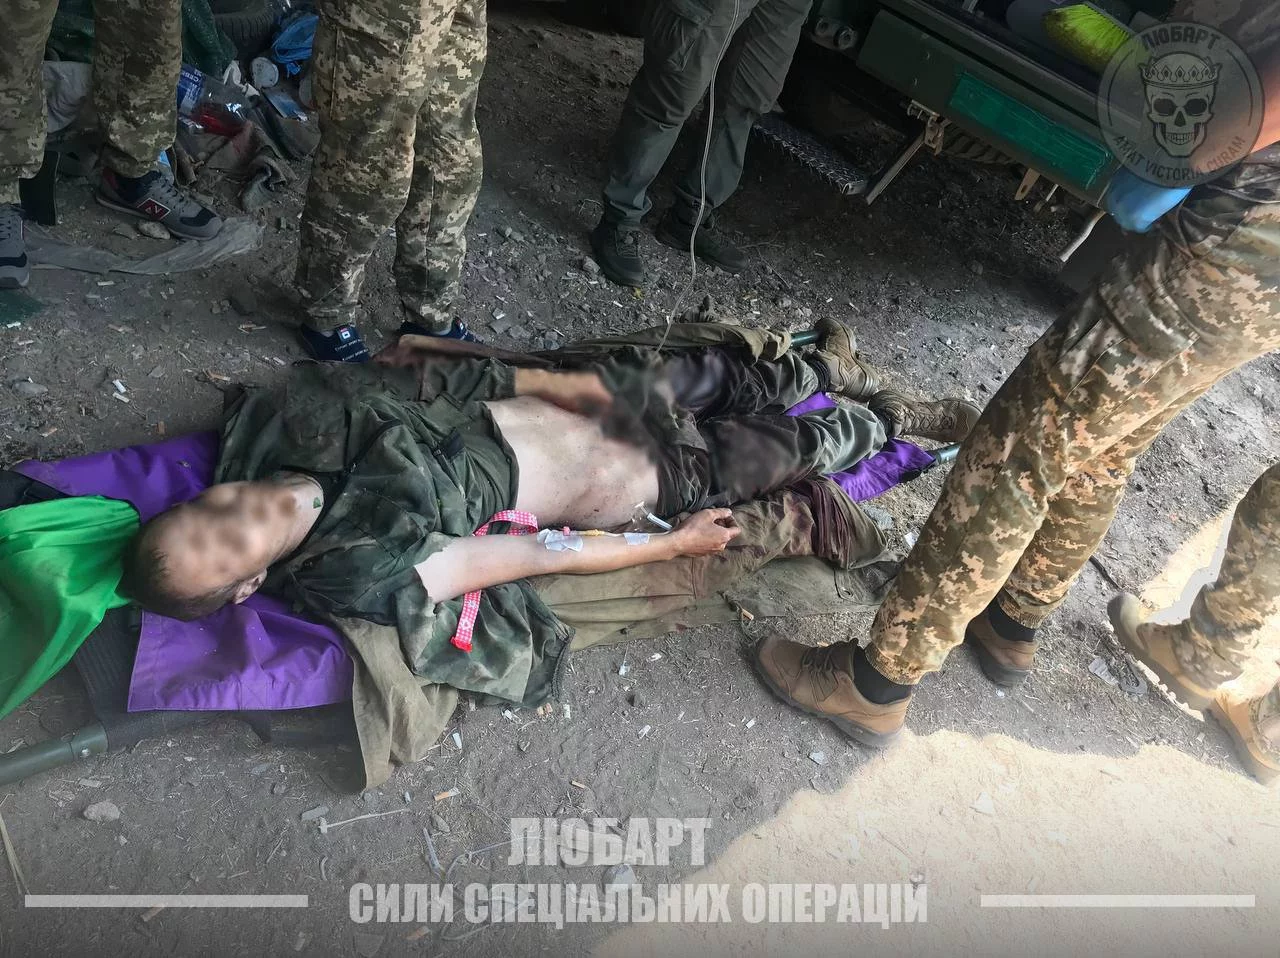 The exchanged platoon commander from the "DPR" was sentenced to 15 years in prison